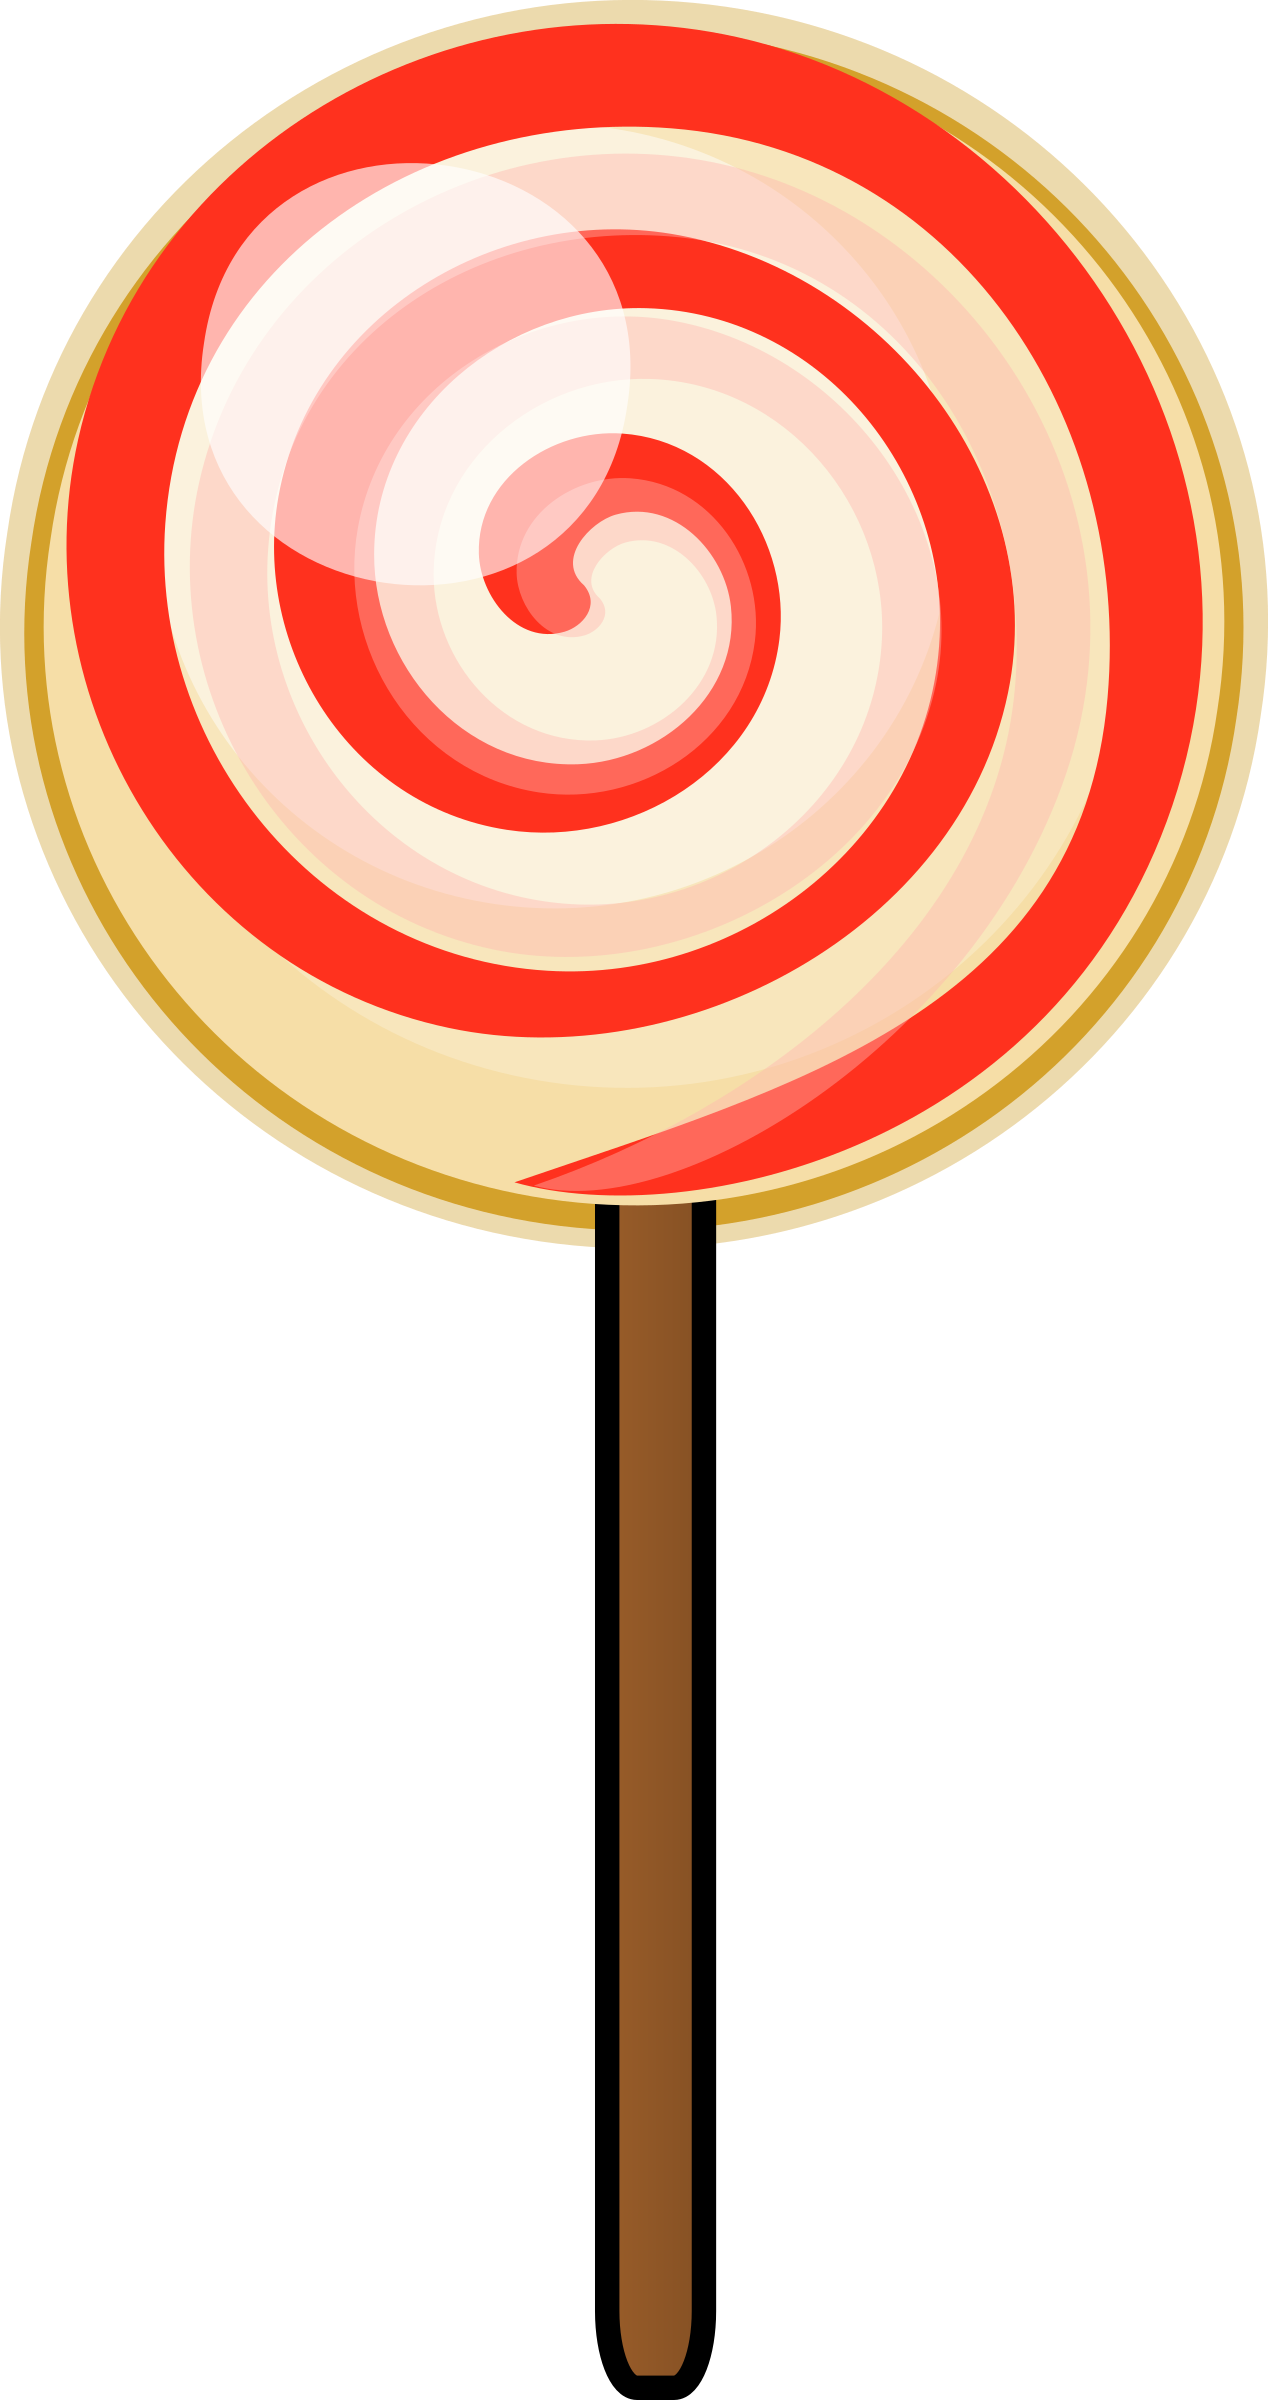 Candy Carmel Lollipop PNG Download Free PNG Image